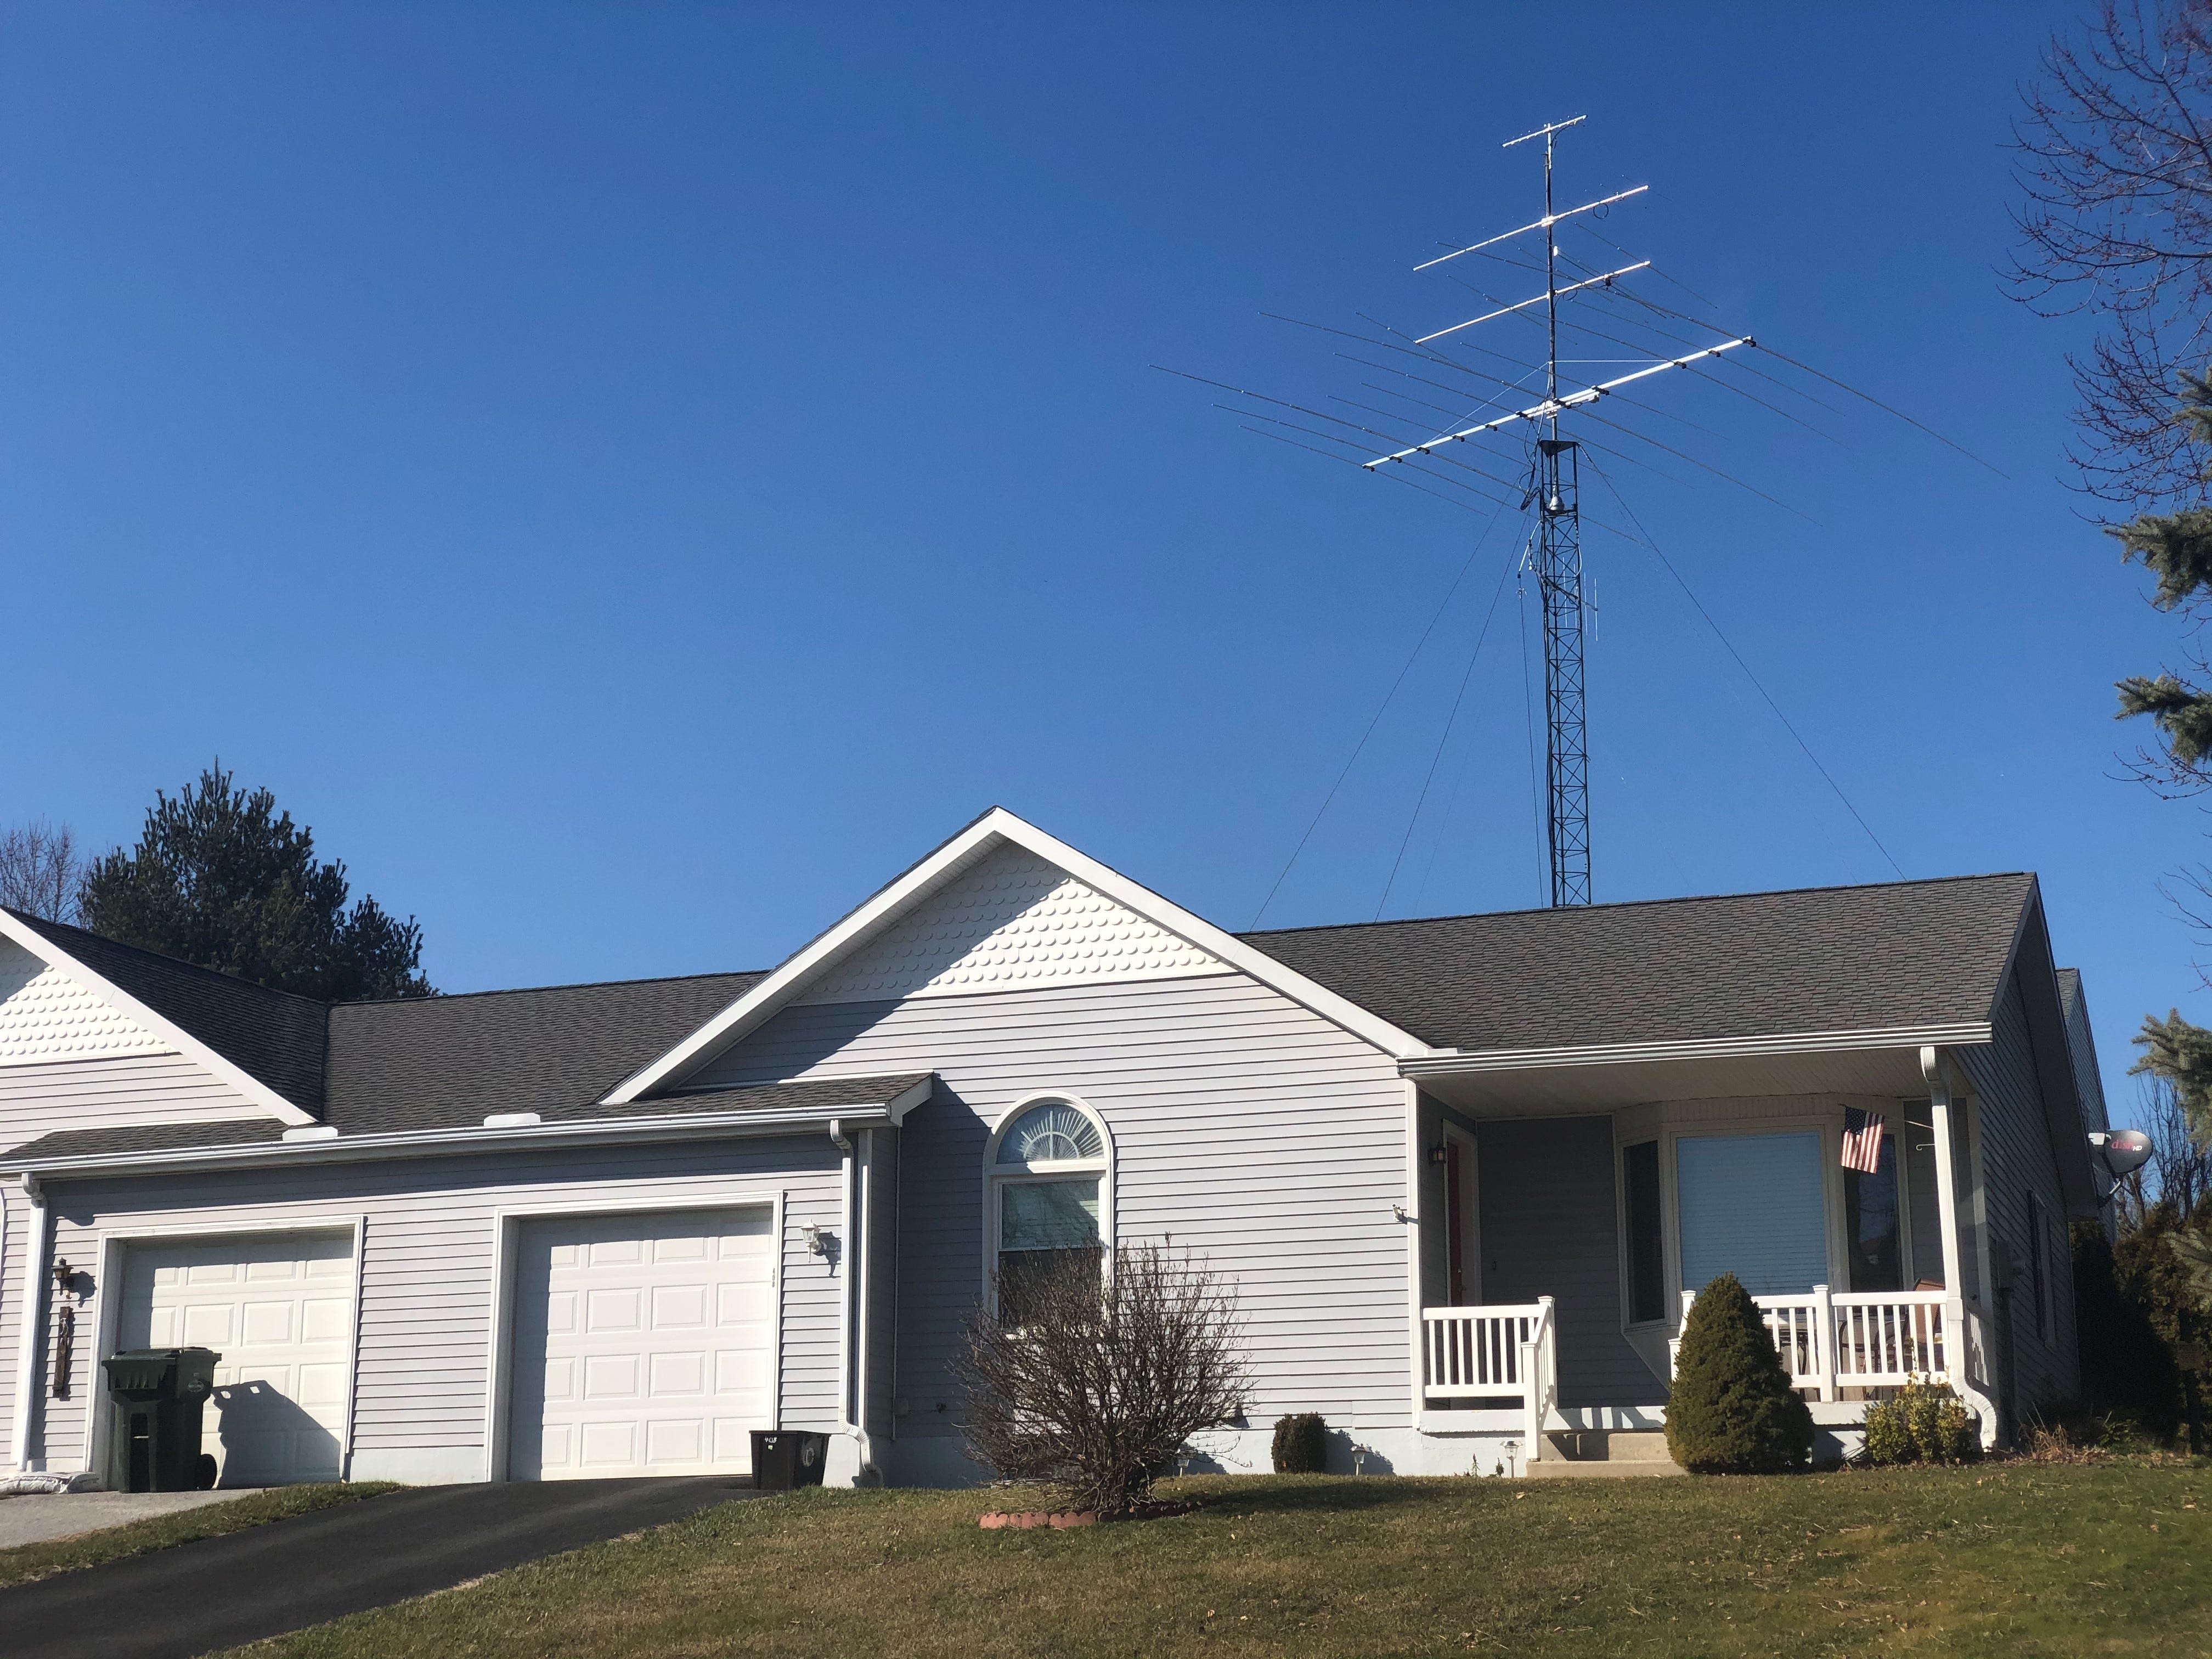 State law protects amateur radio operators, frustrates neighbors